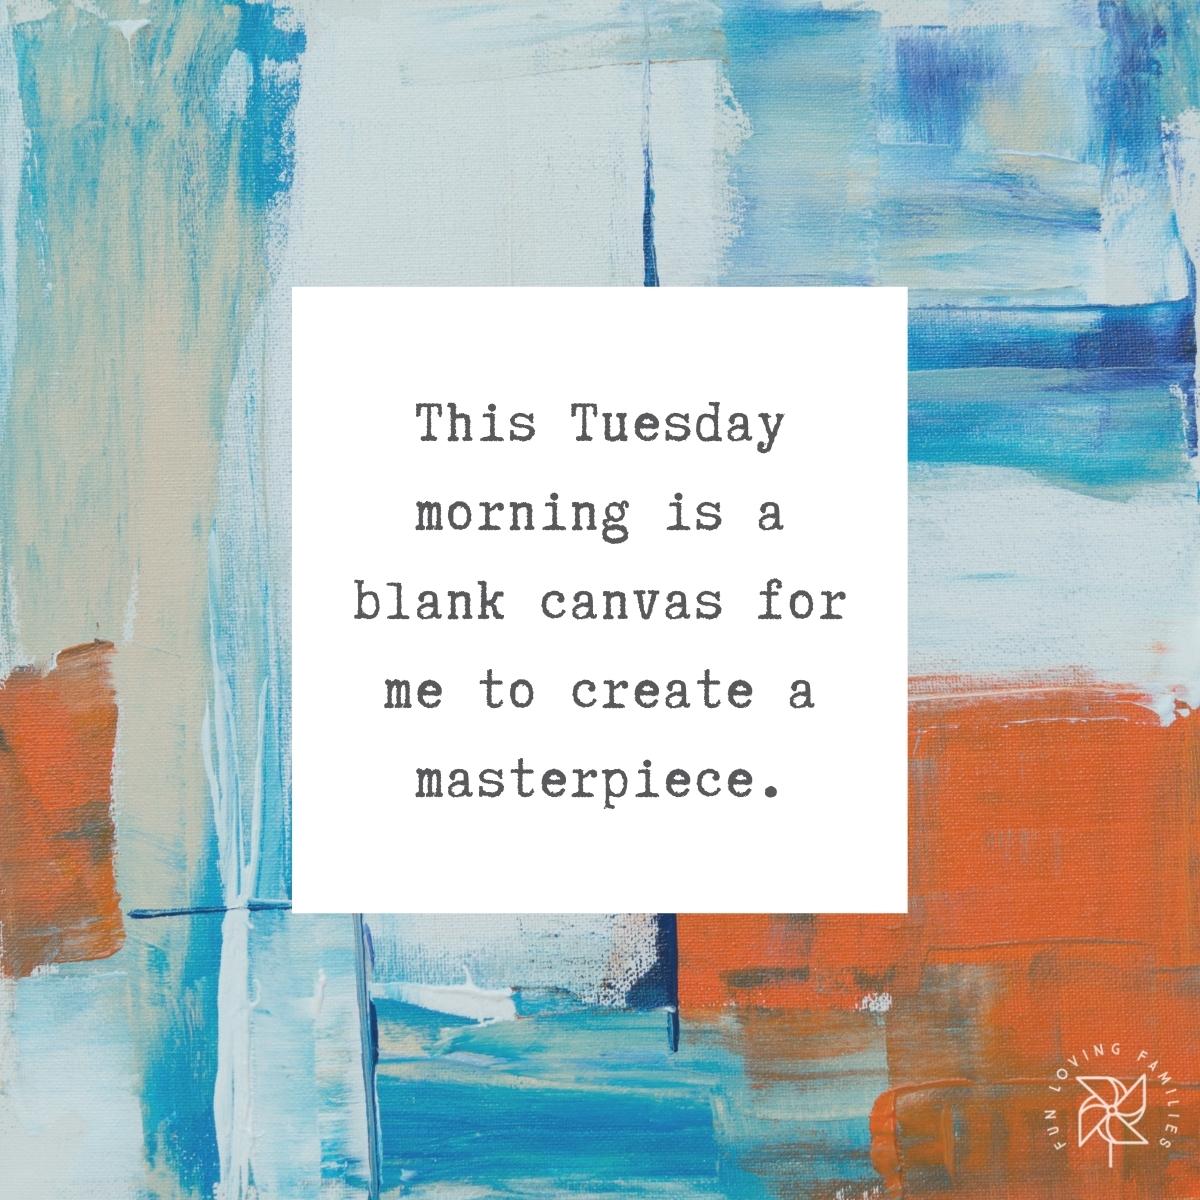 This Tuesday morning is a blank canvas for me to create a masterpiece affirmation image